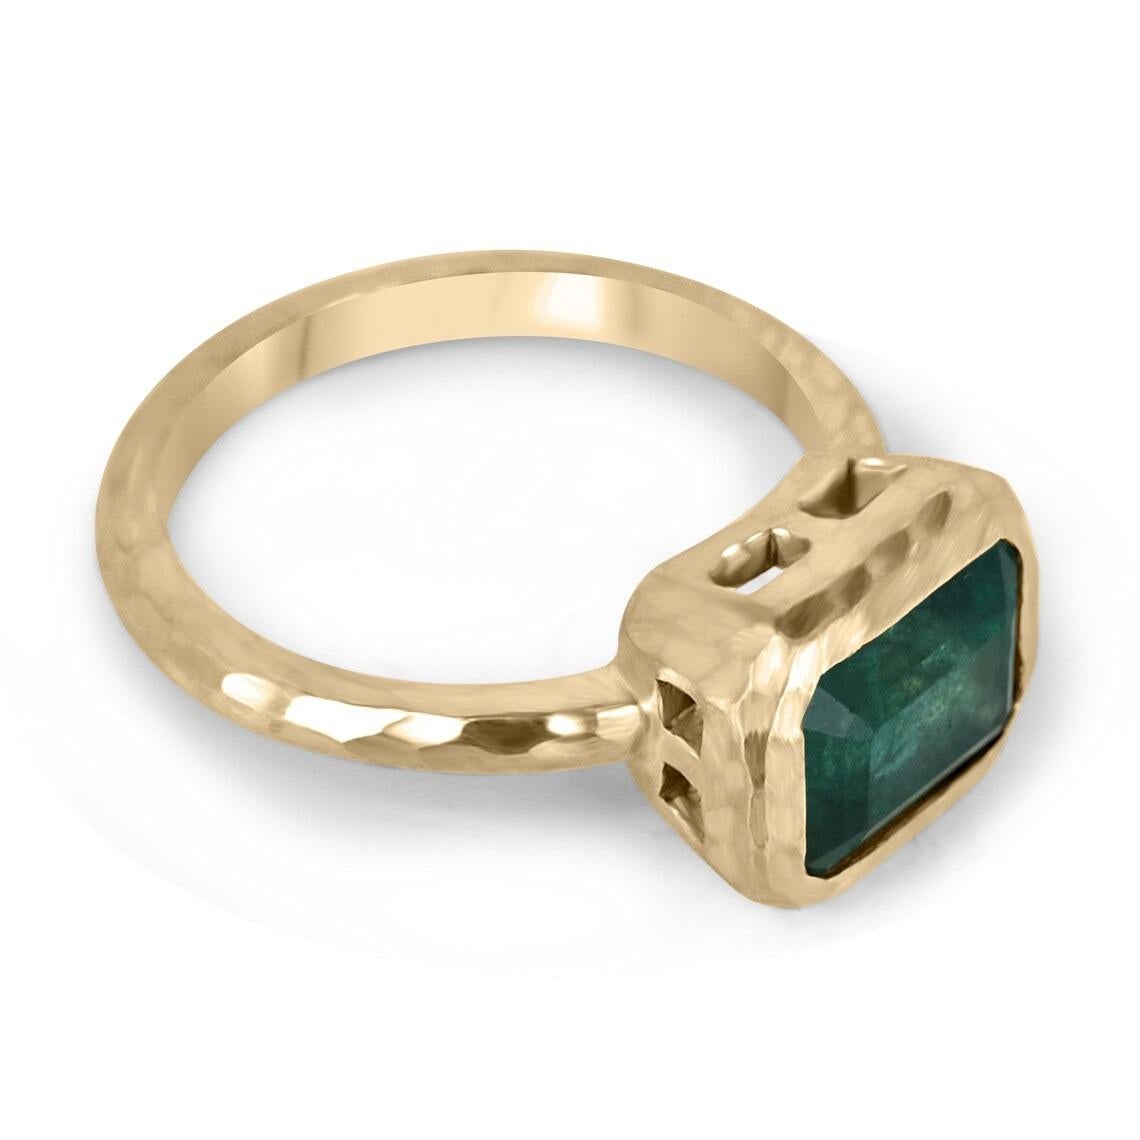 Displayed is a stunning East-to-West emerald solitaire engagement or right-hand ring in 14K yellow gold. This gorgeous solitaire ring carries a 2.48-carat emerald in a bezel setting. Fully faceted, this gemstone showcases excellent shine and